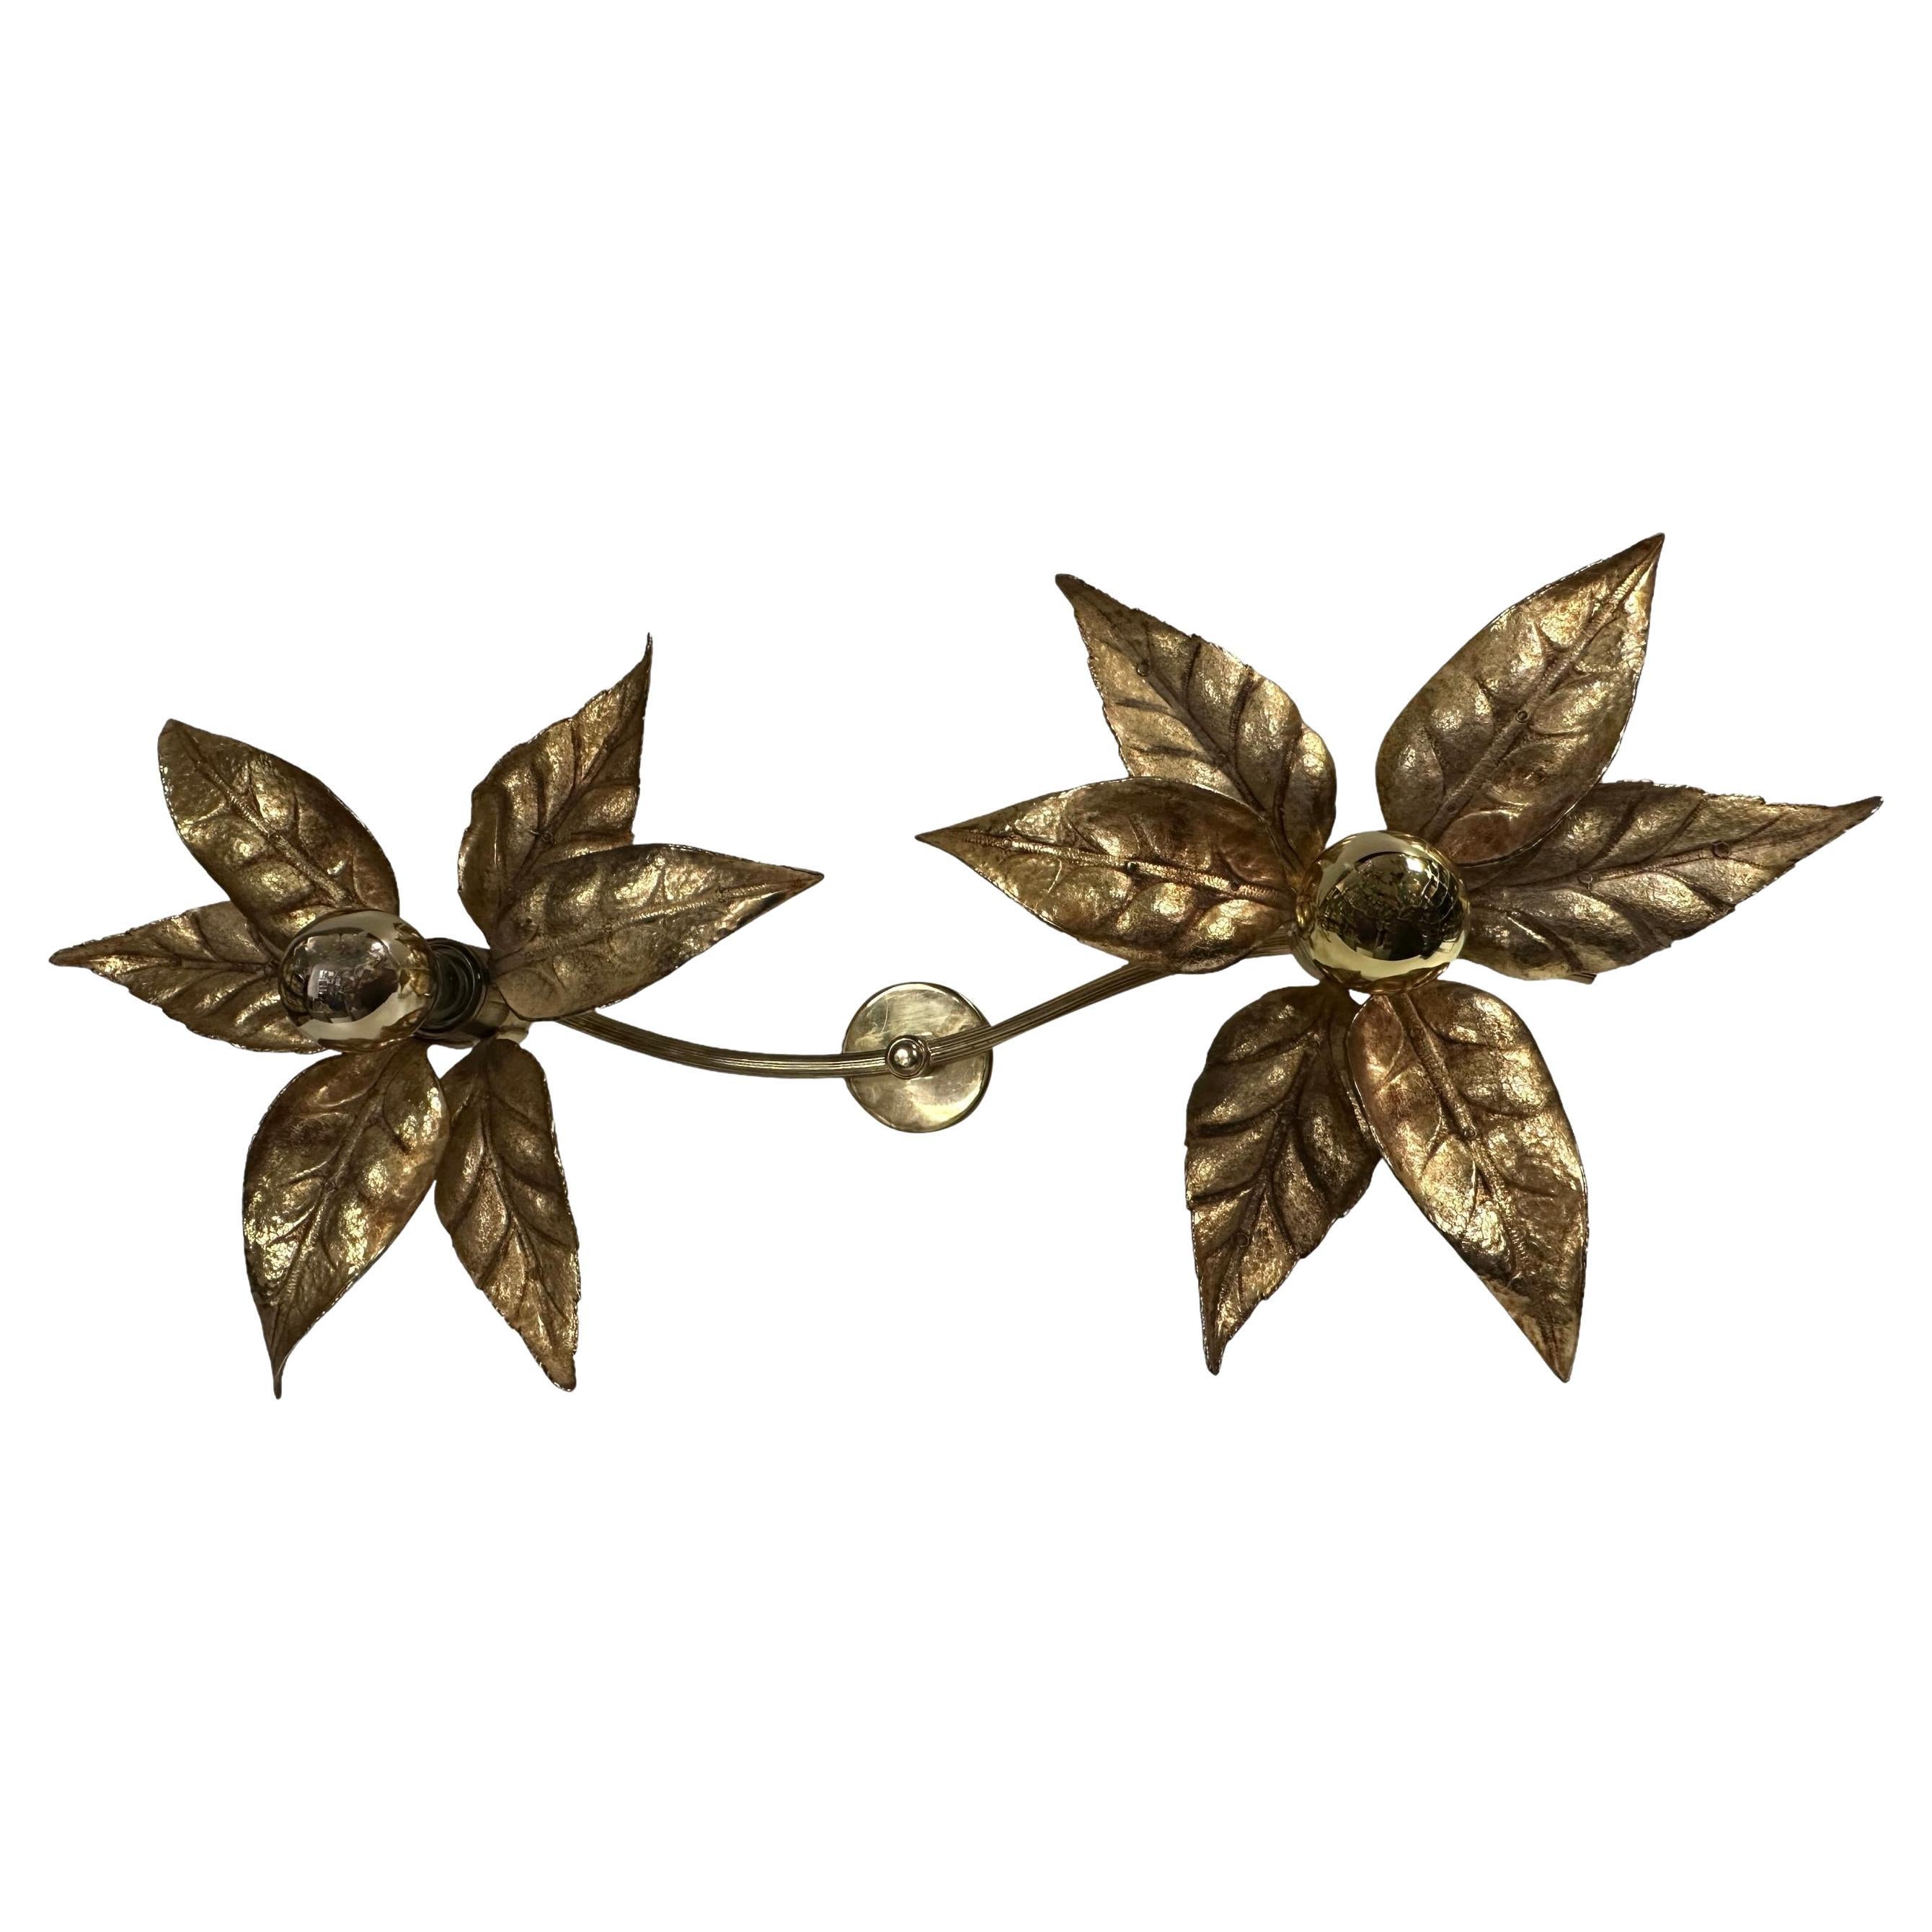 Willy Daro Two-Flower Wall Light, Massive Lighting, 1970s For Sale